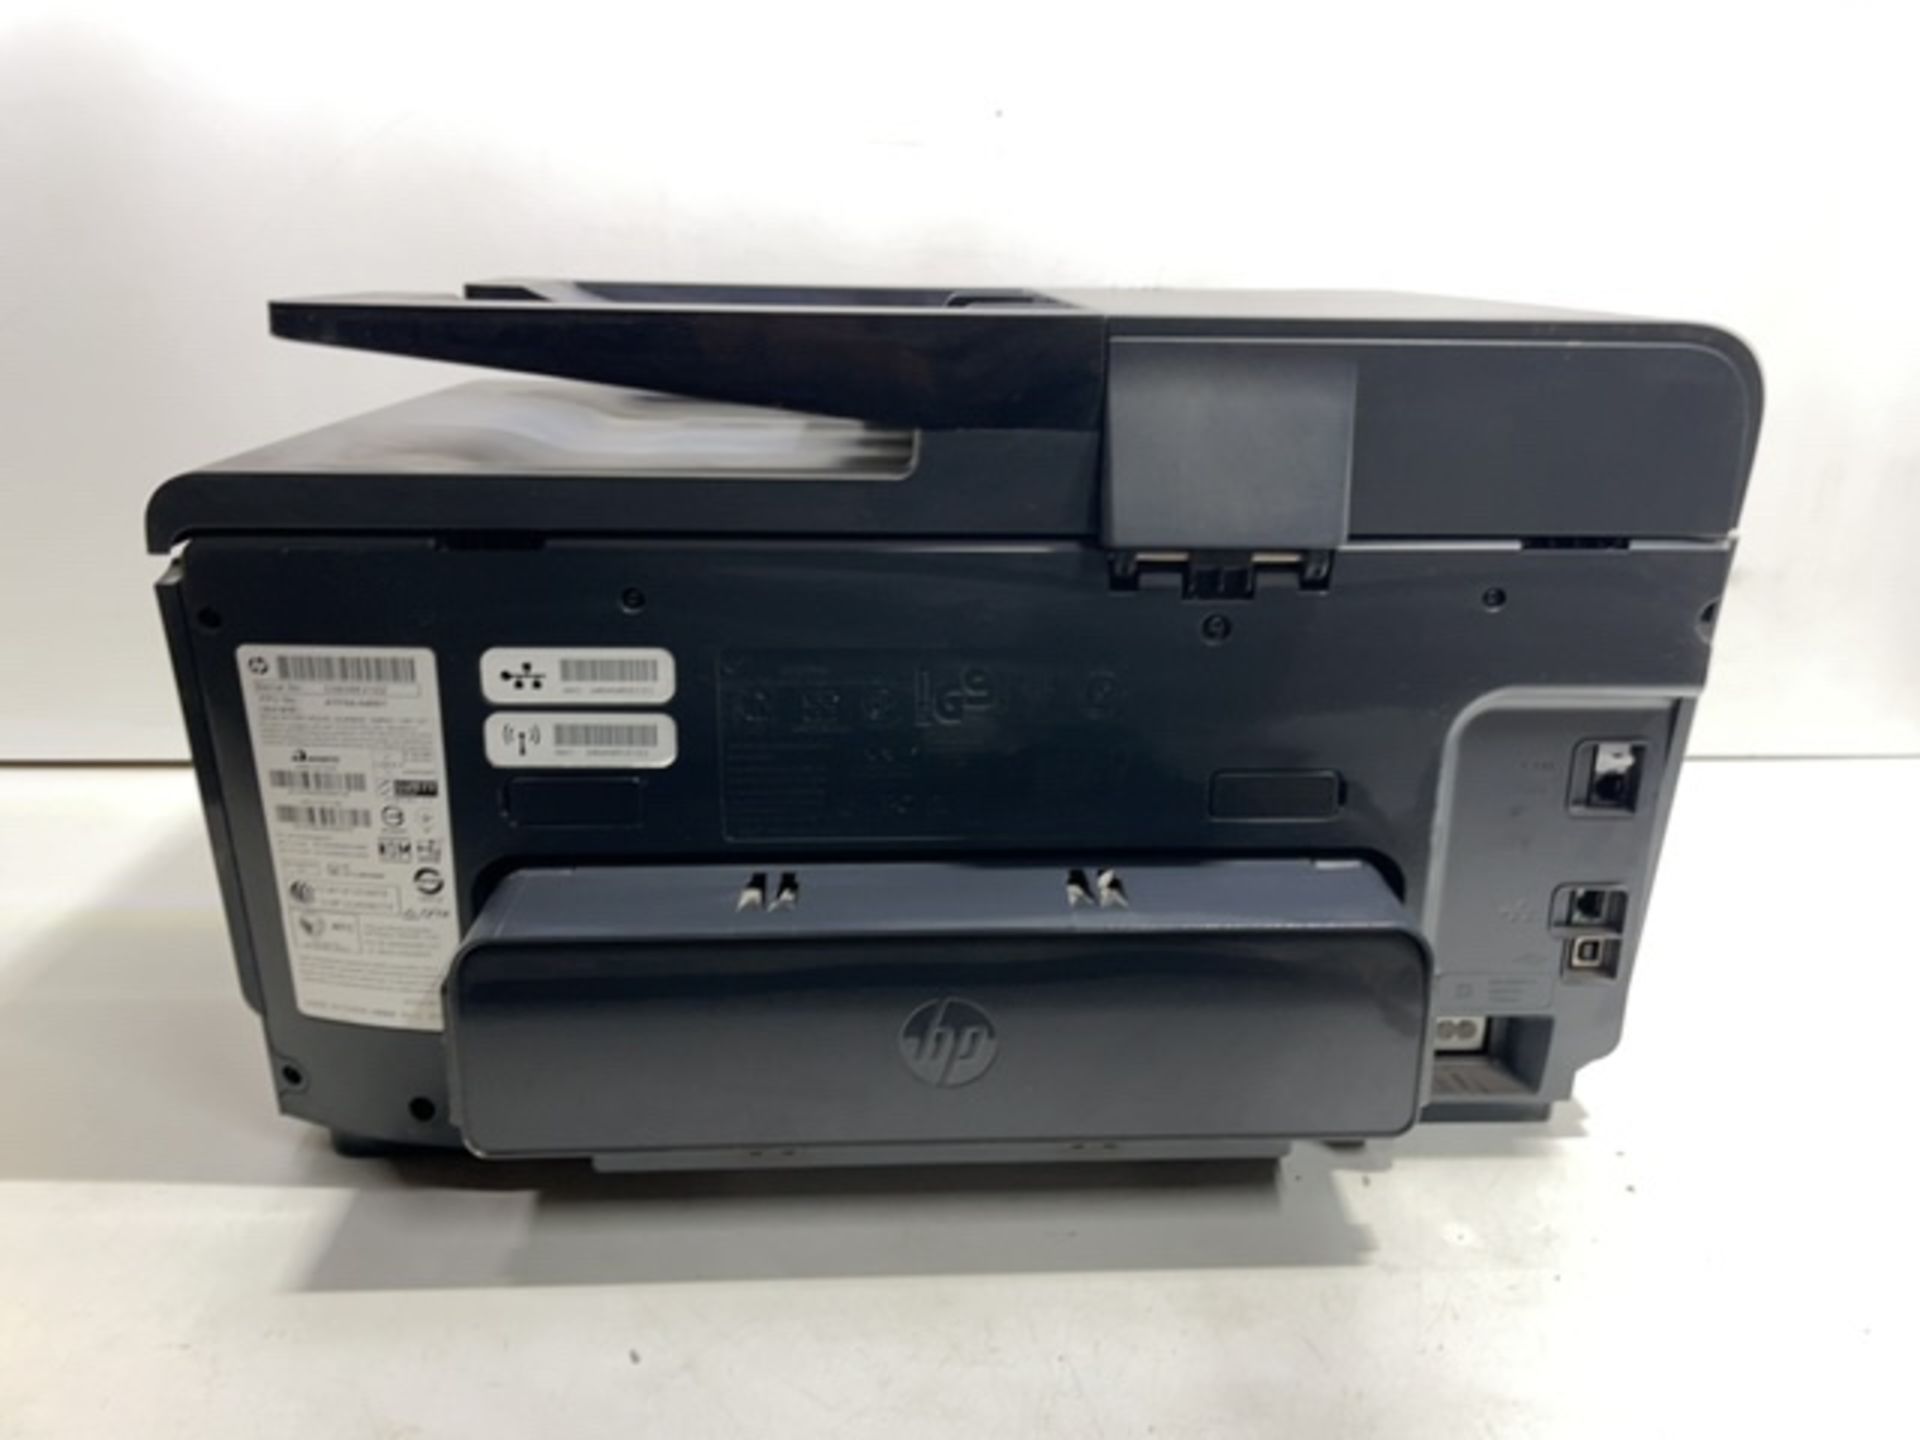 HP Officejet Pro 8610 e-All-in-One Printer - Image 5 of 6